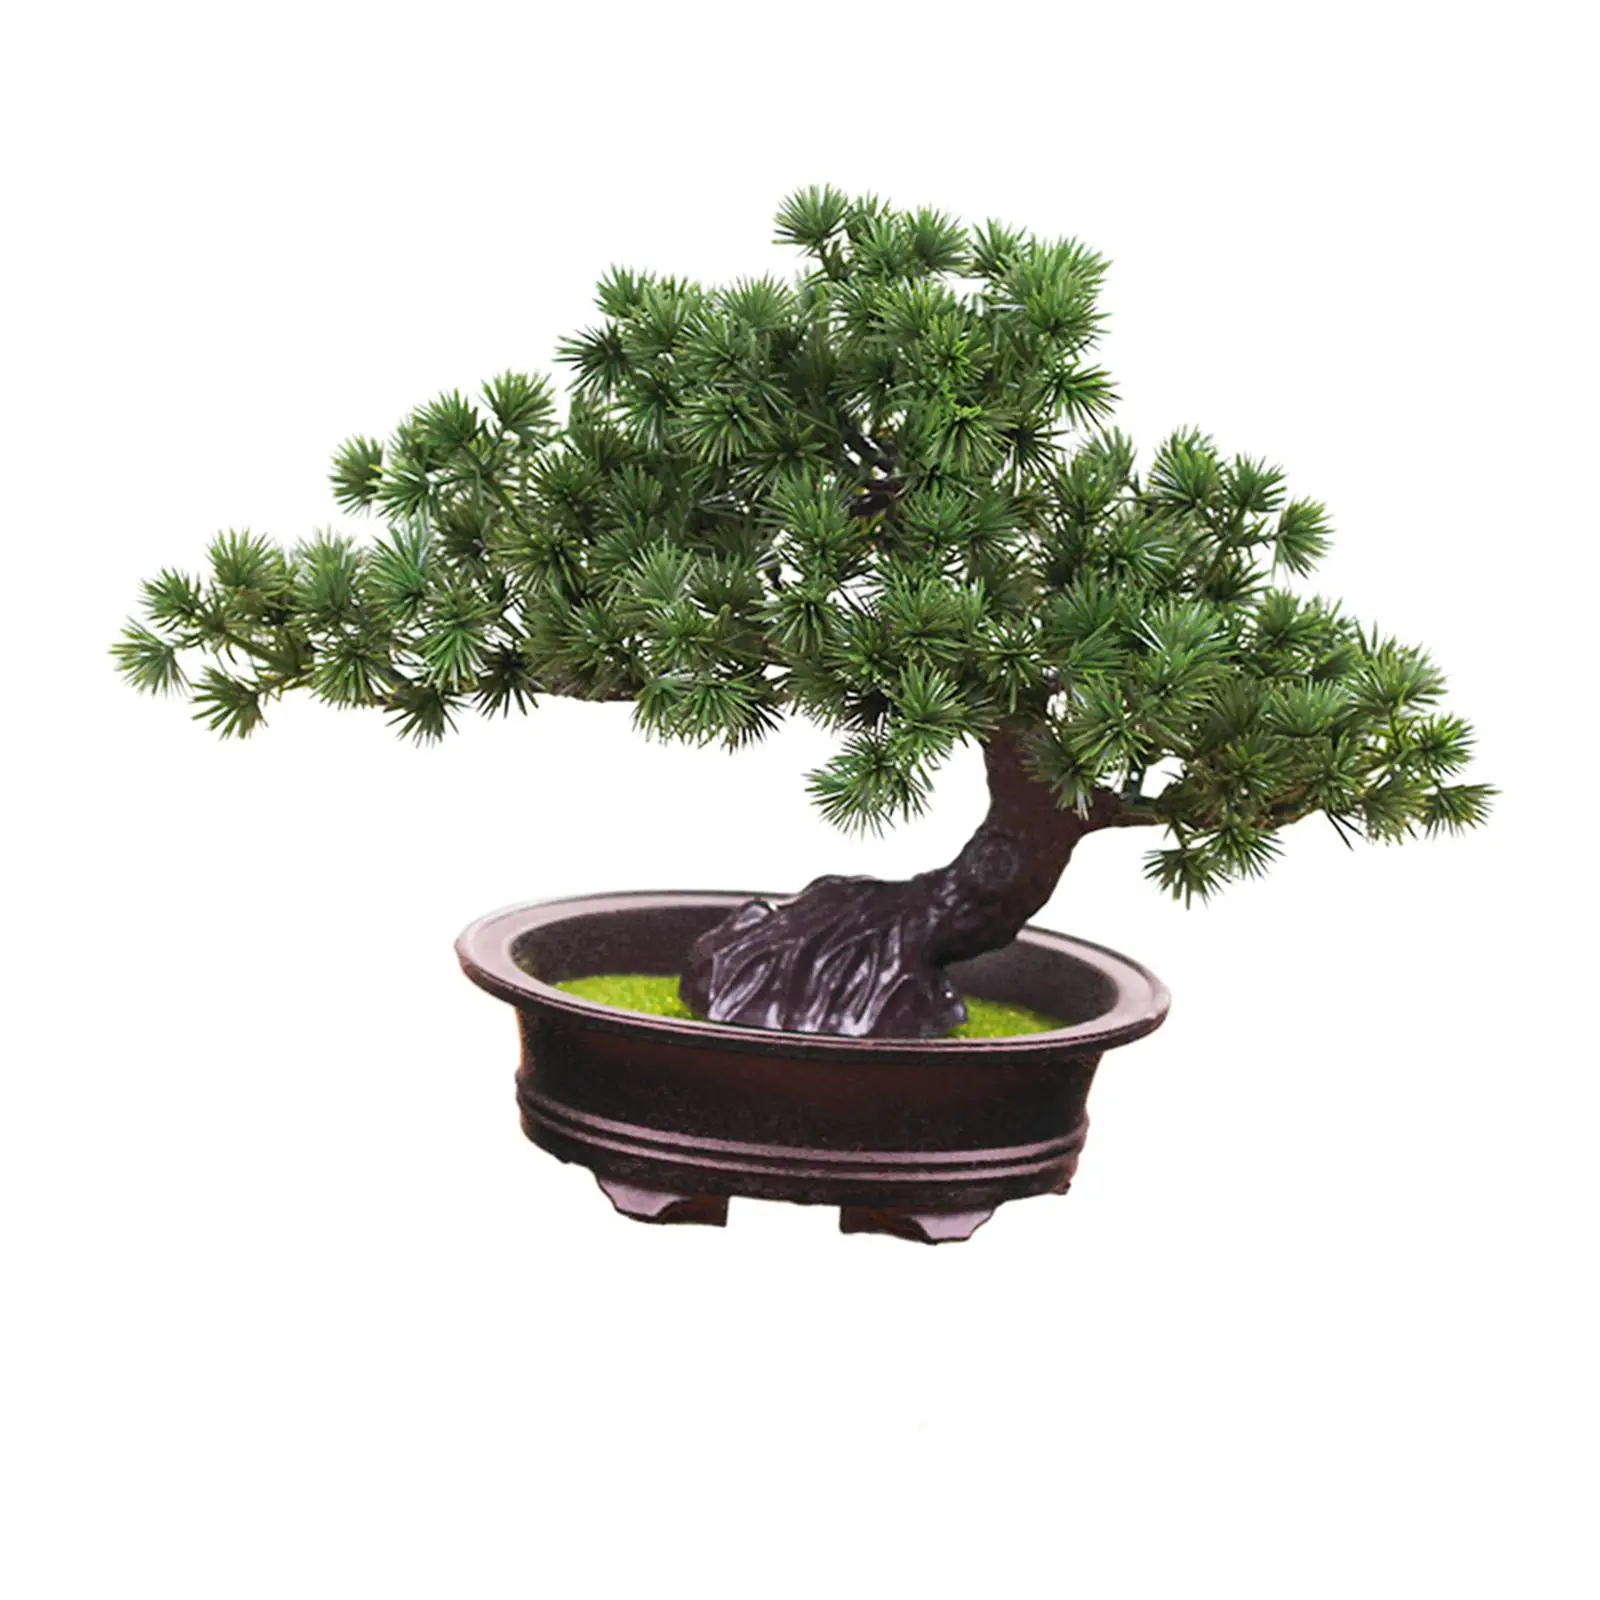 Artificial Potted Plants Welcoming Pine Tree Desk Ornament Lifelike Table Centerpiece for Bathroom Decor Sturdy Multipurpose